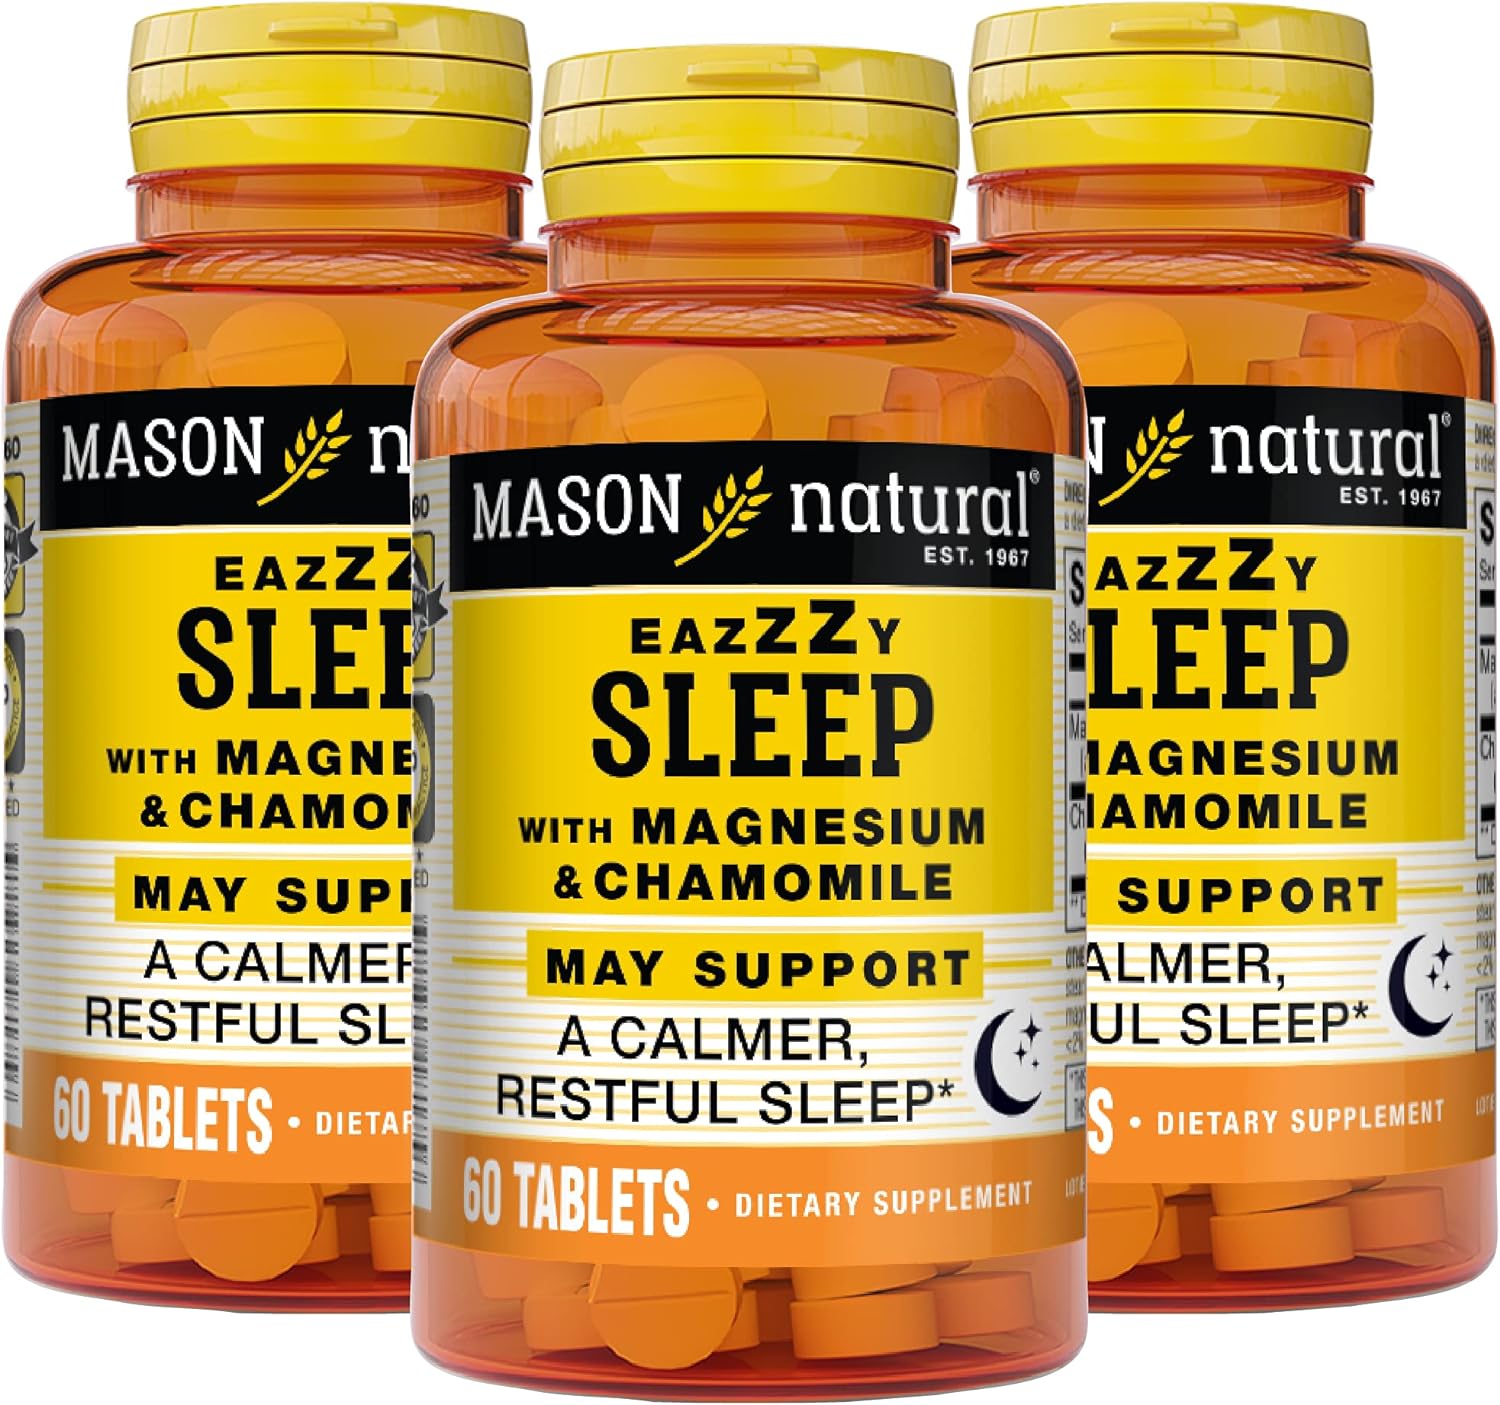 Mason Natural Eazzzy Sleep with Magnesium & Chamomile - Natural Sleep Aid, Supports A Calmer Restful Sleep, 60 Tablets (Pack of 3)